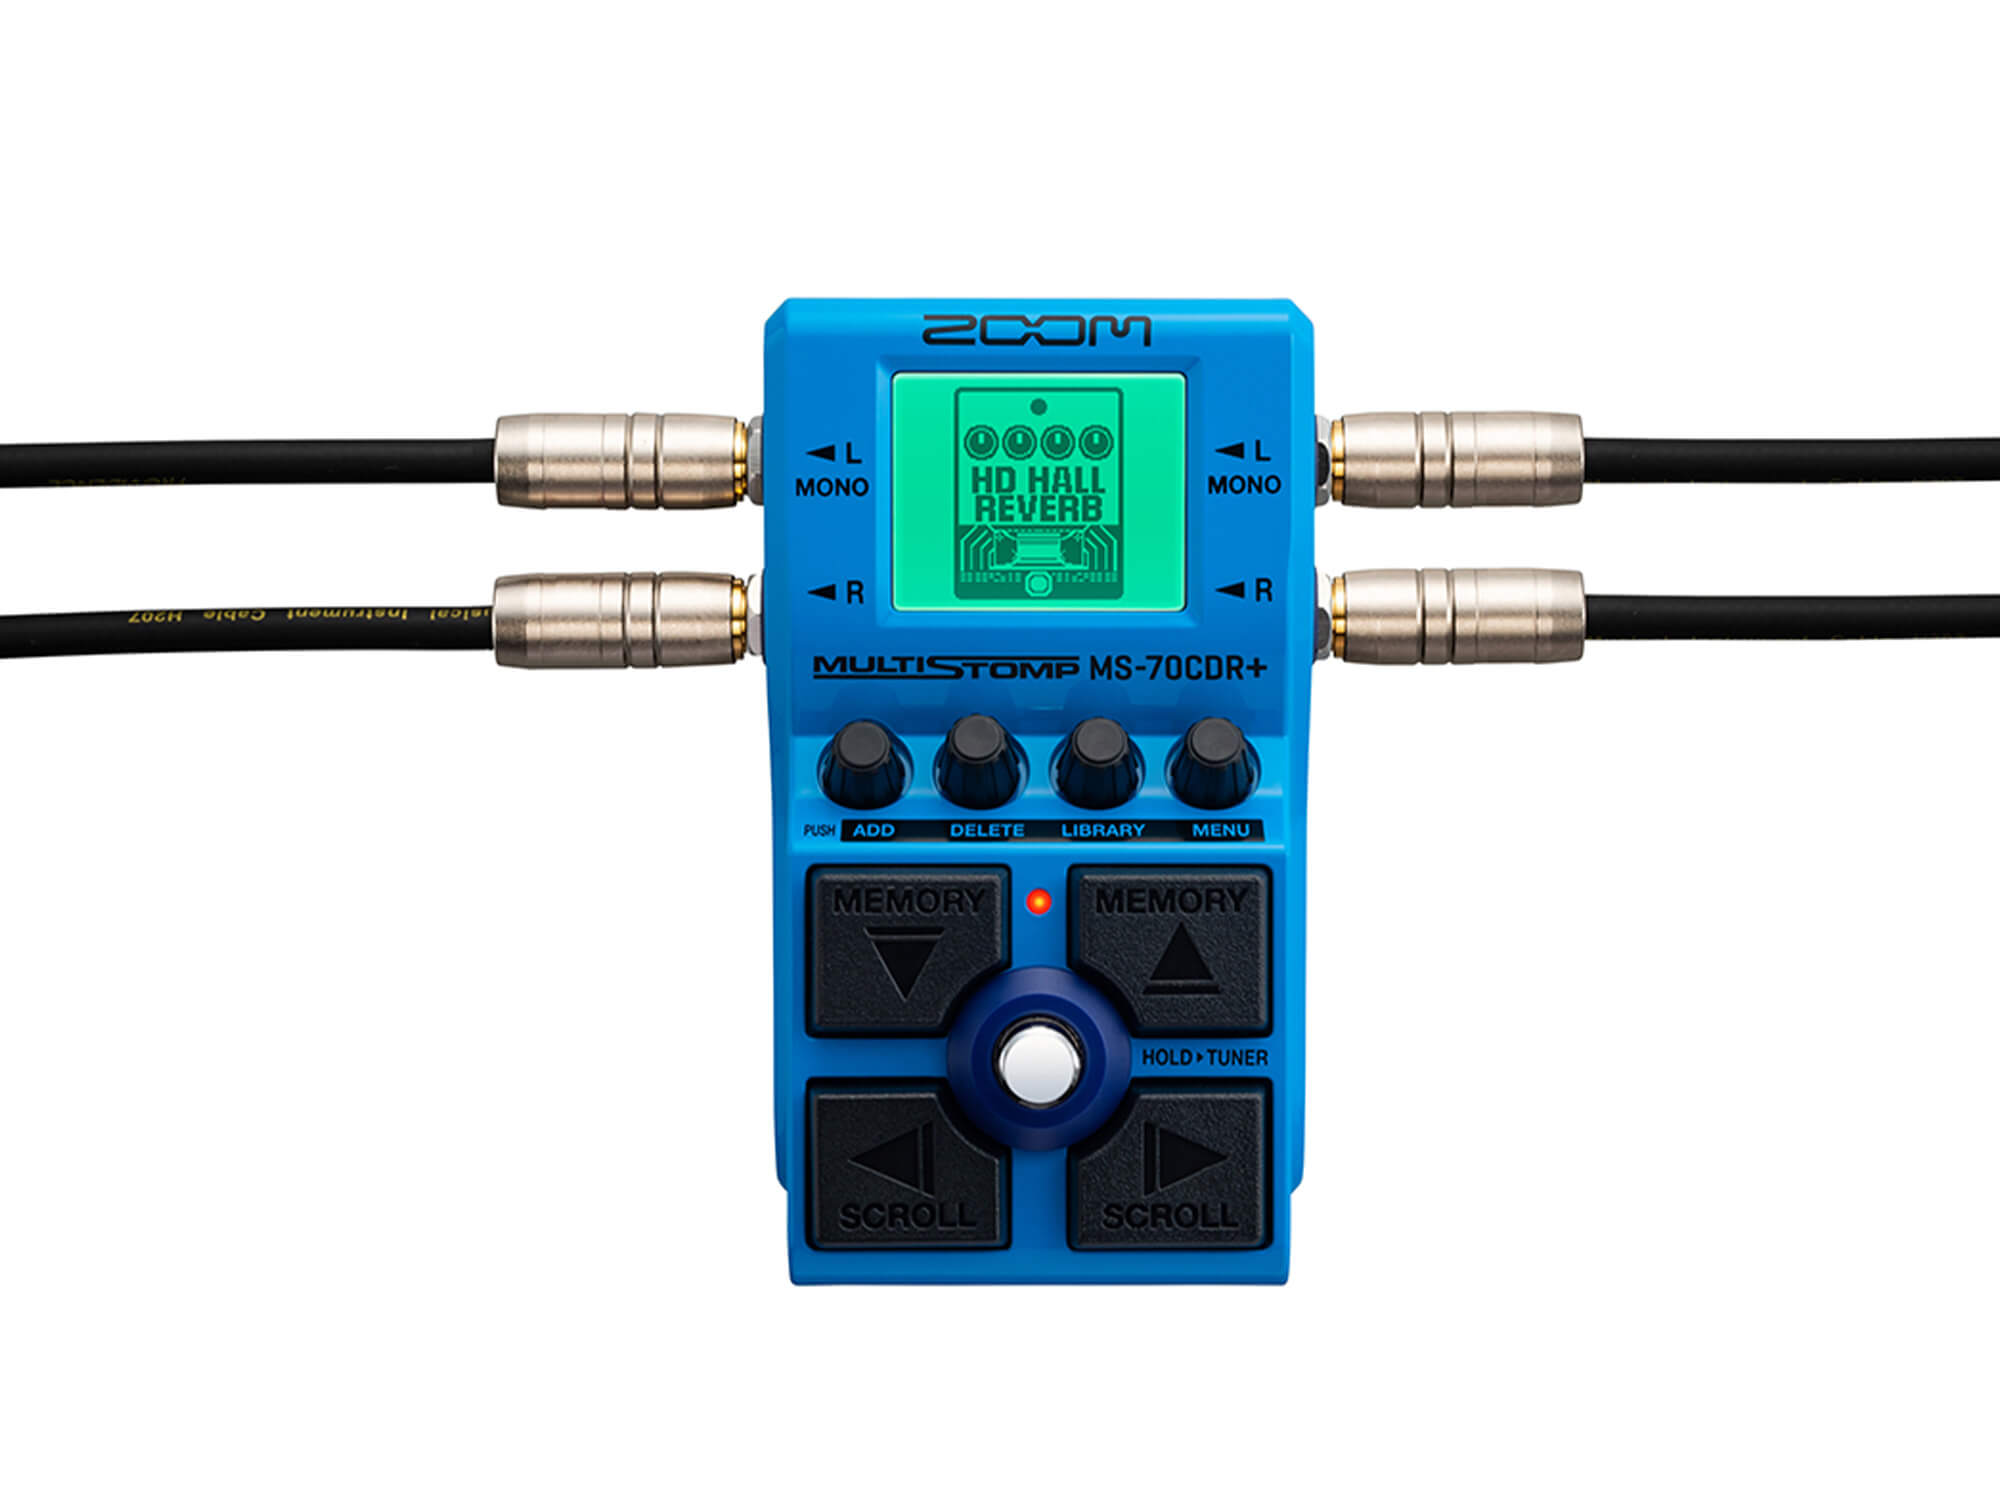 The Zoom MS-70CDR+. It is a blue, small pedal with four large buttons for memory and scroll, with the pedal switch situated in the middle. It also hosts a coloured screen.